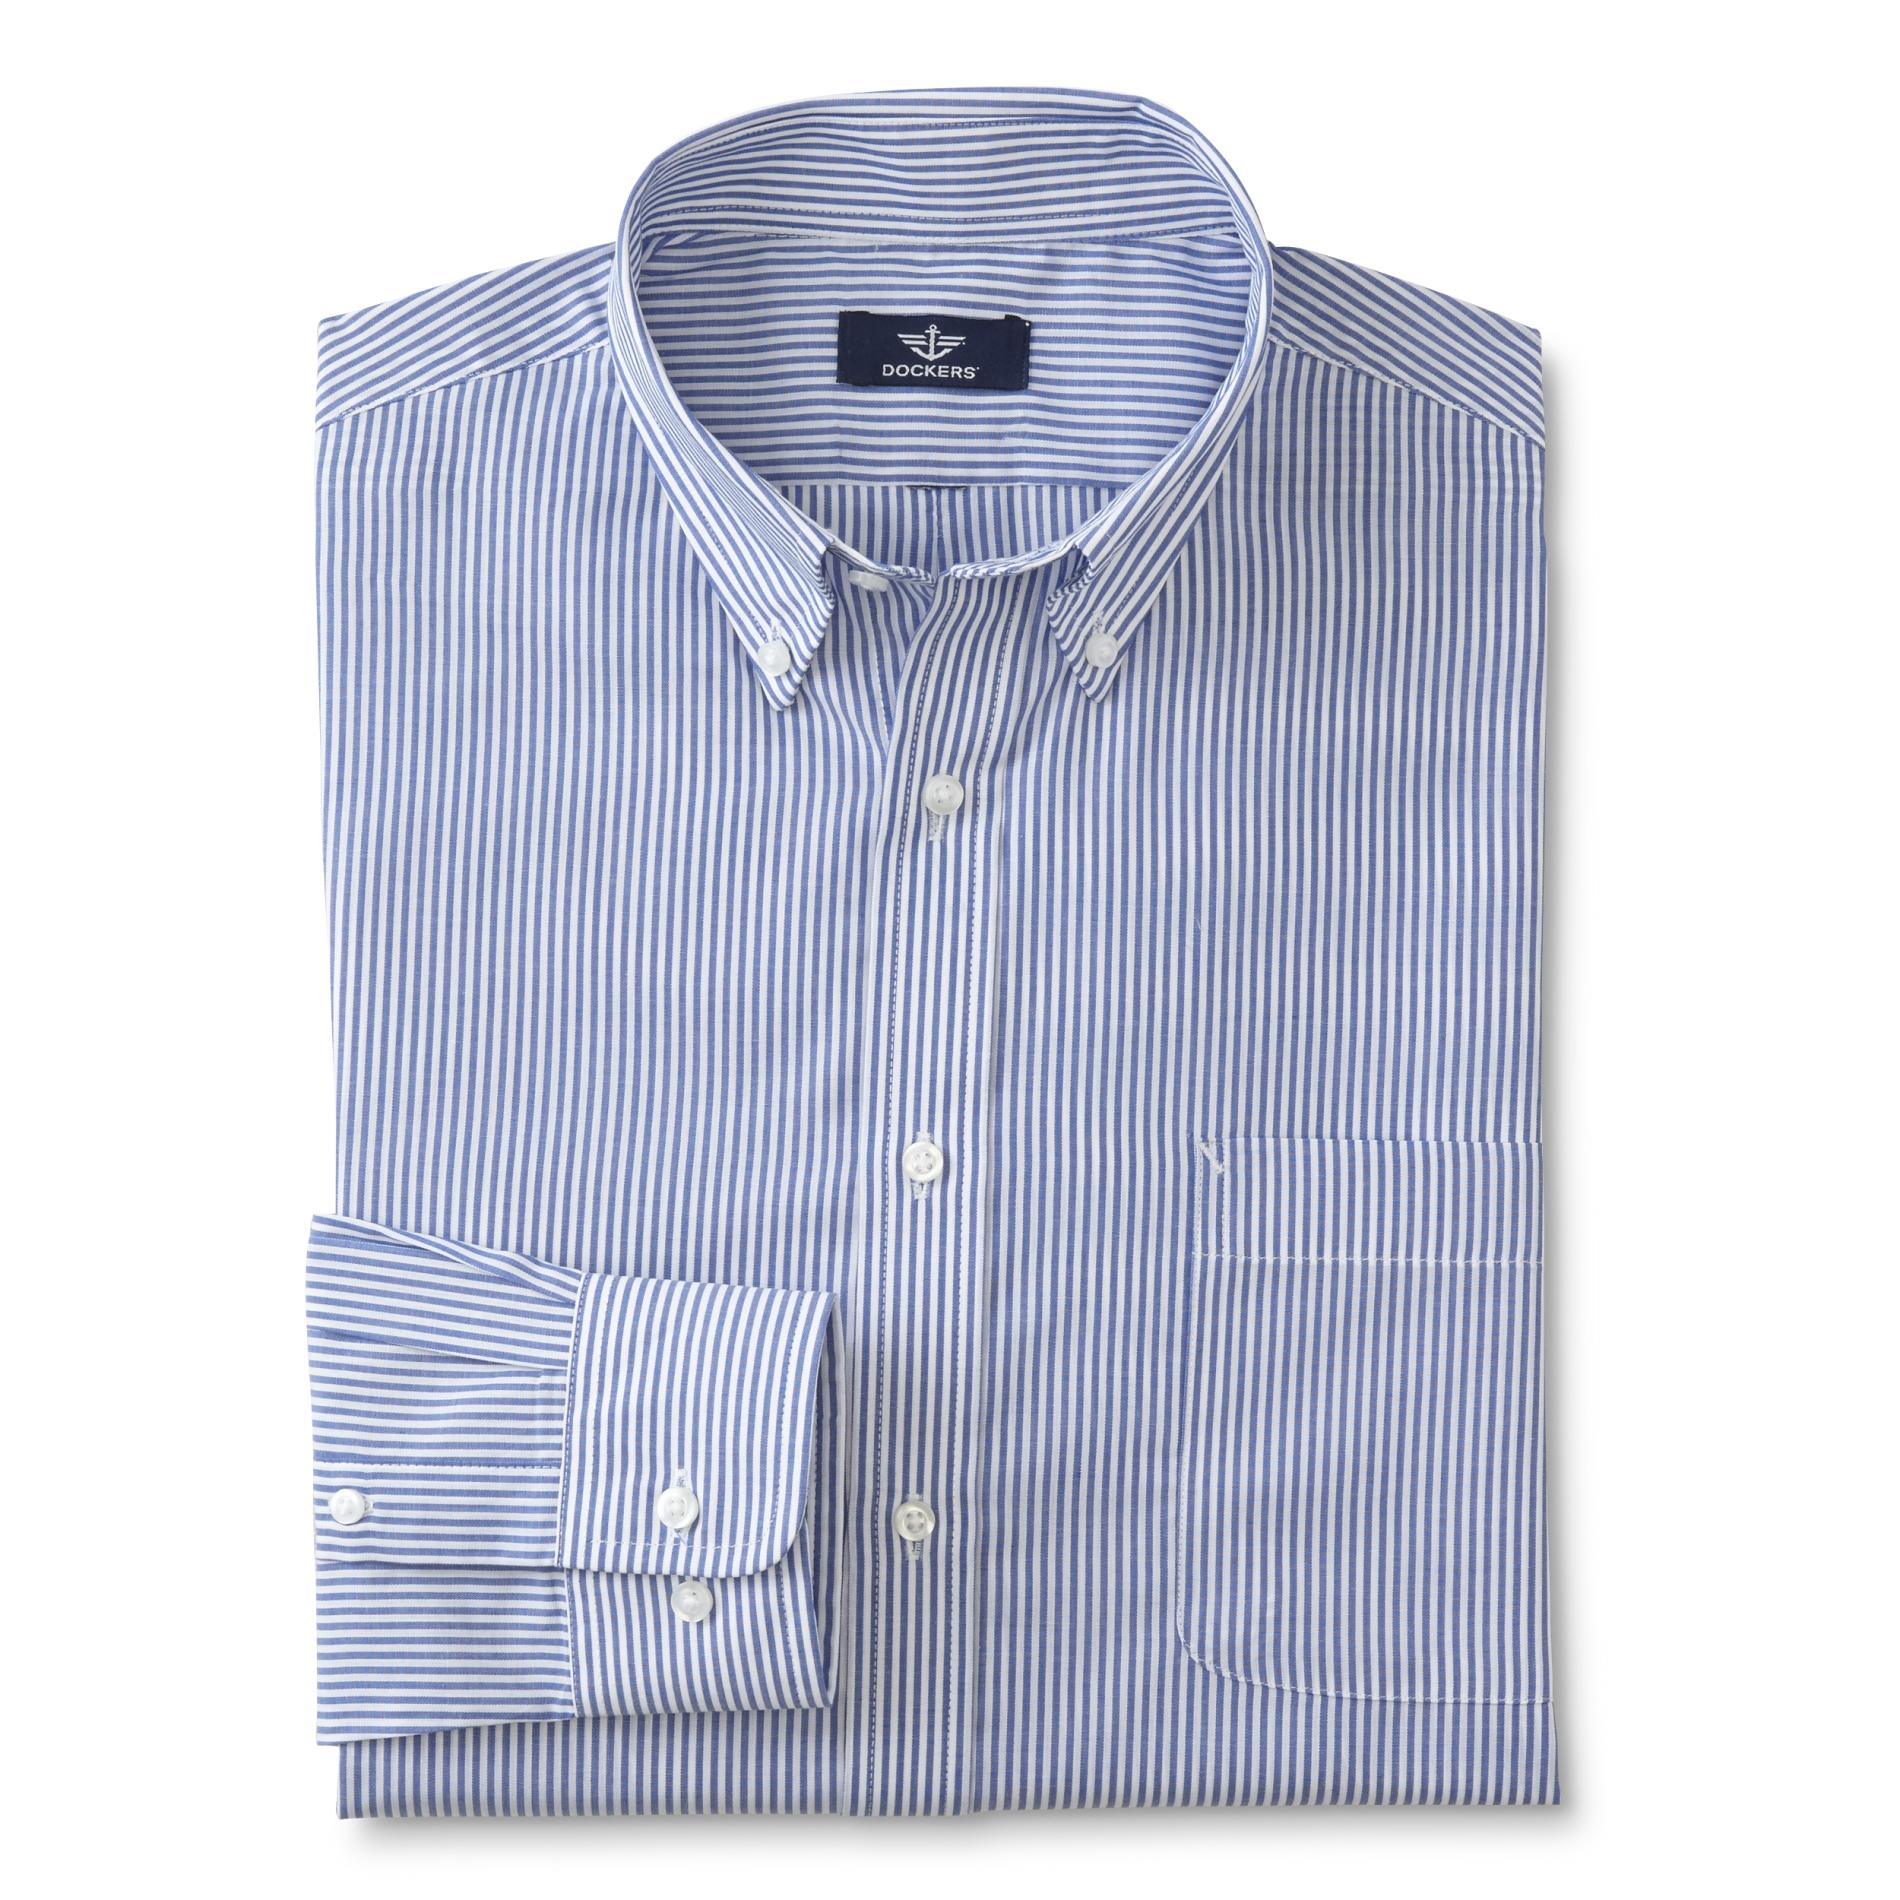 Dockers Men's Fitted Sport Shirt - Striped